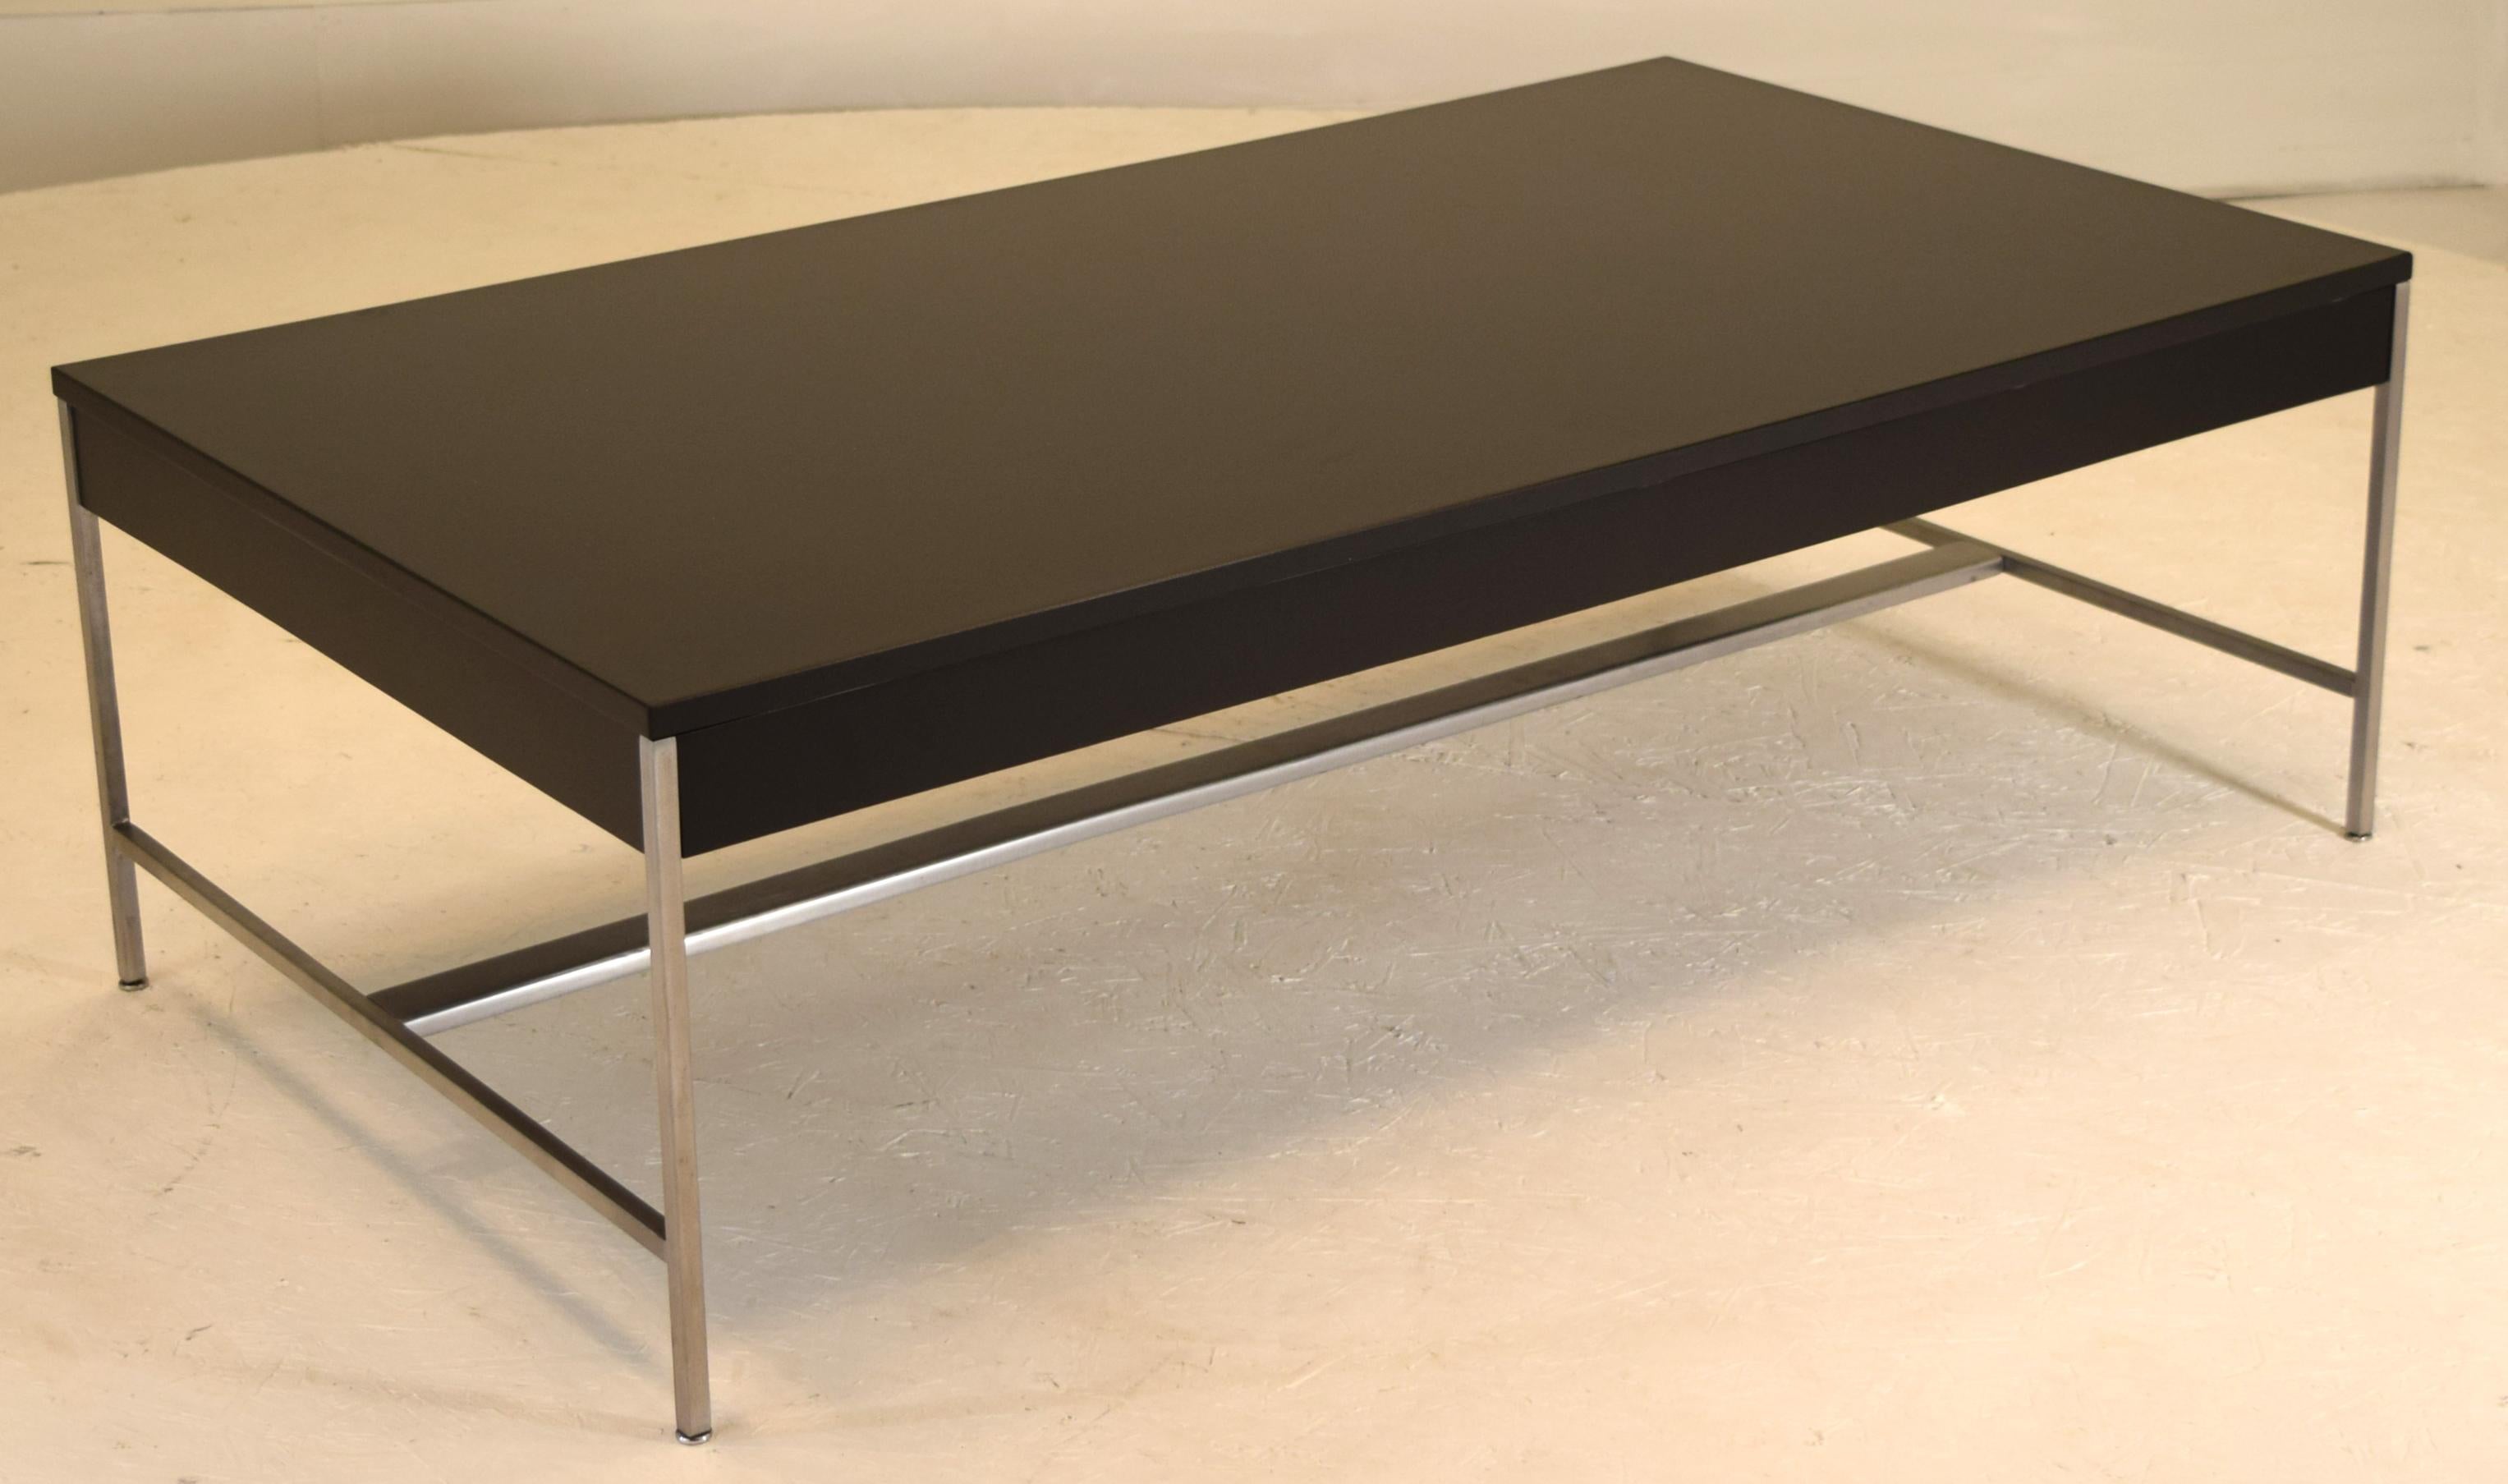 George Nelson for Herman Miller thin edge model 5751 produced, circa 1960. Frame is polished steel coffee table. Tops and sides have been coated in black satin lacquer specifically designed to not be harmed by alcohol, water, hot or cold beverages.